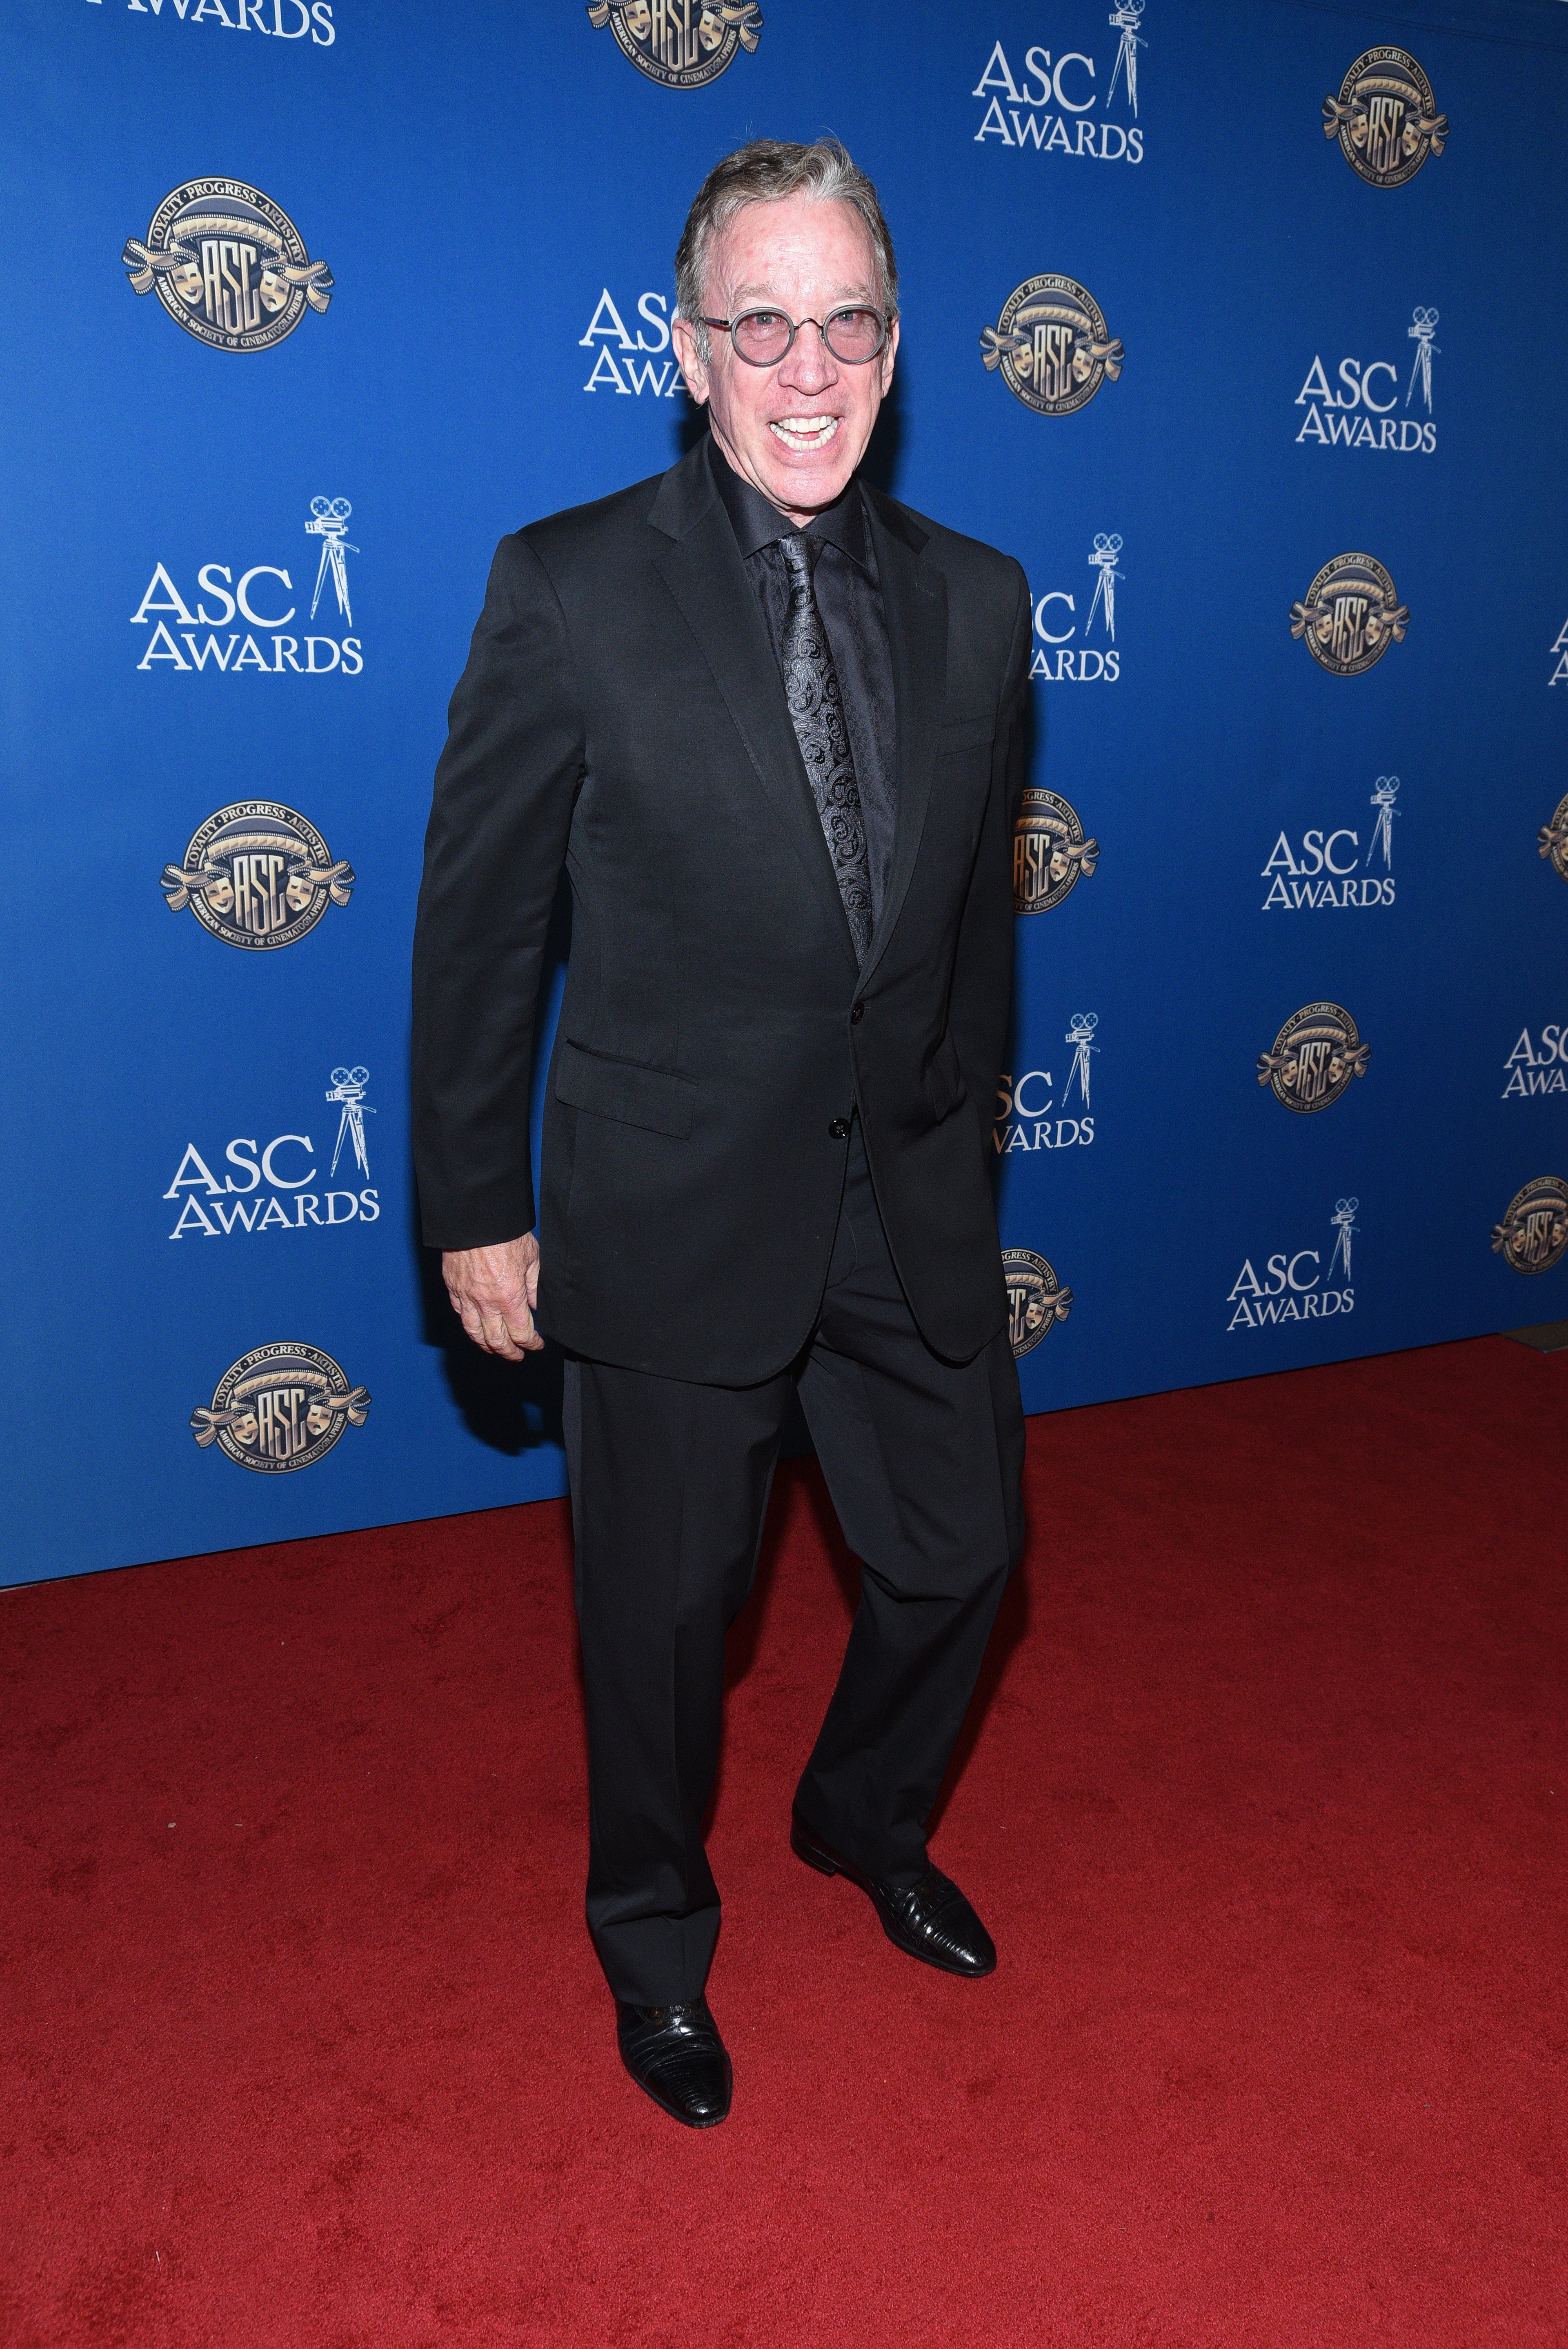 Tim Allen at the 34th annual American Society of Cinematographers Awards on January 25, 2020 in California | Source: Getty Images